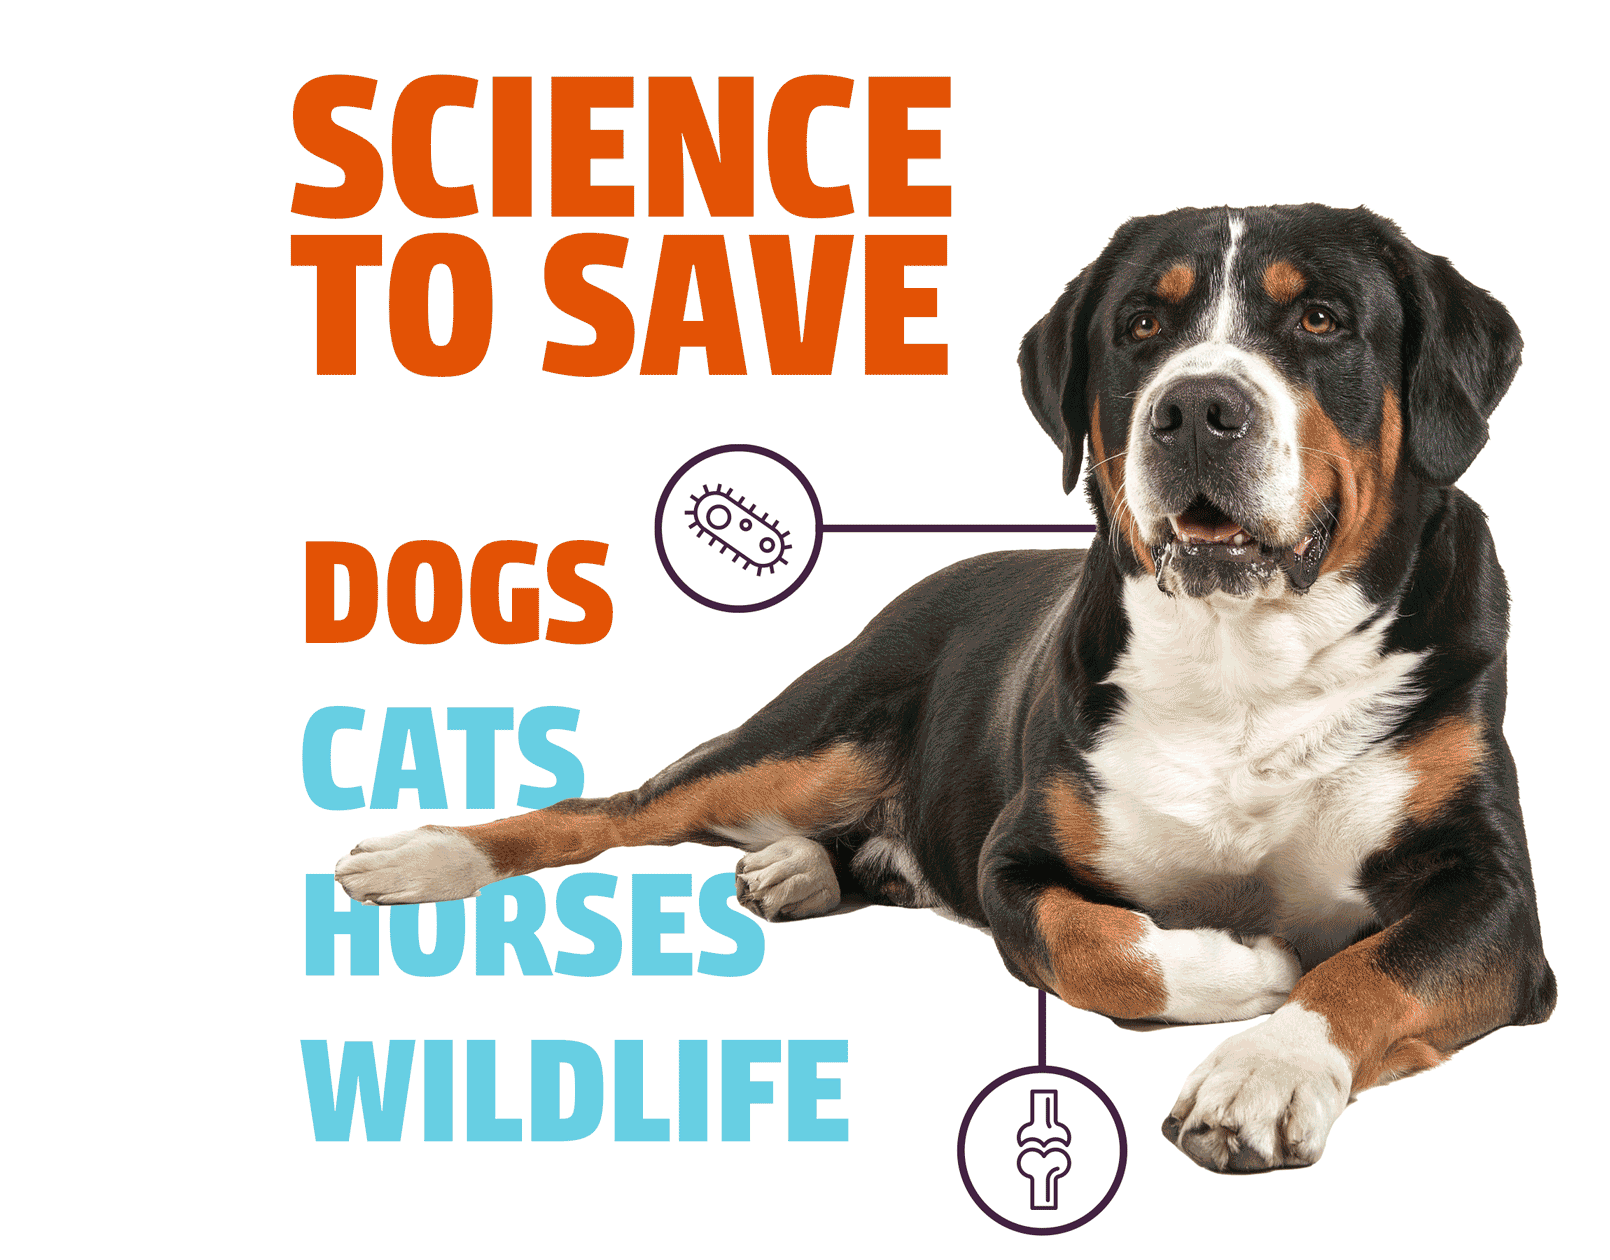 Science to Save Dogs, Science to Save Cats, Science to Save Horses, Science to Save Wildlife